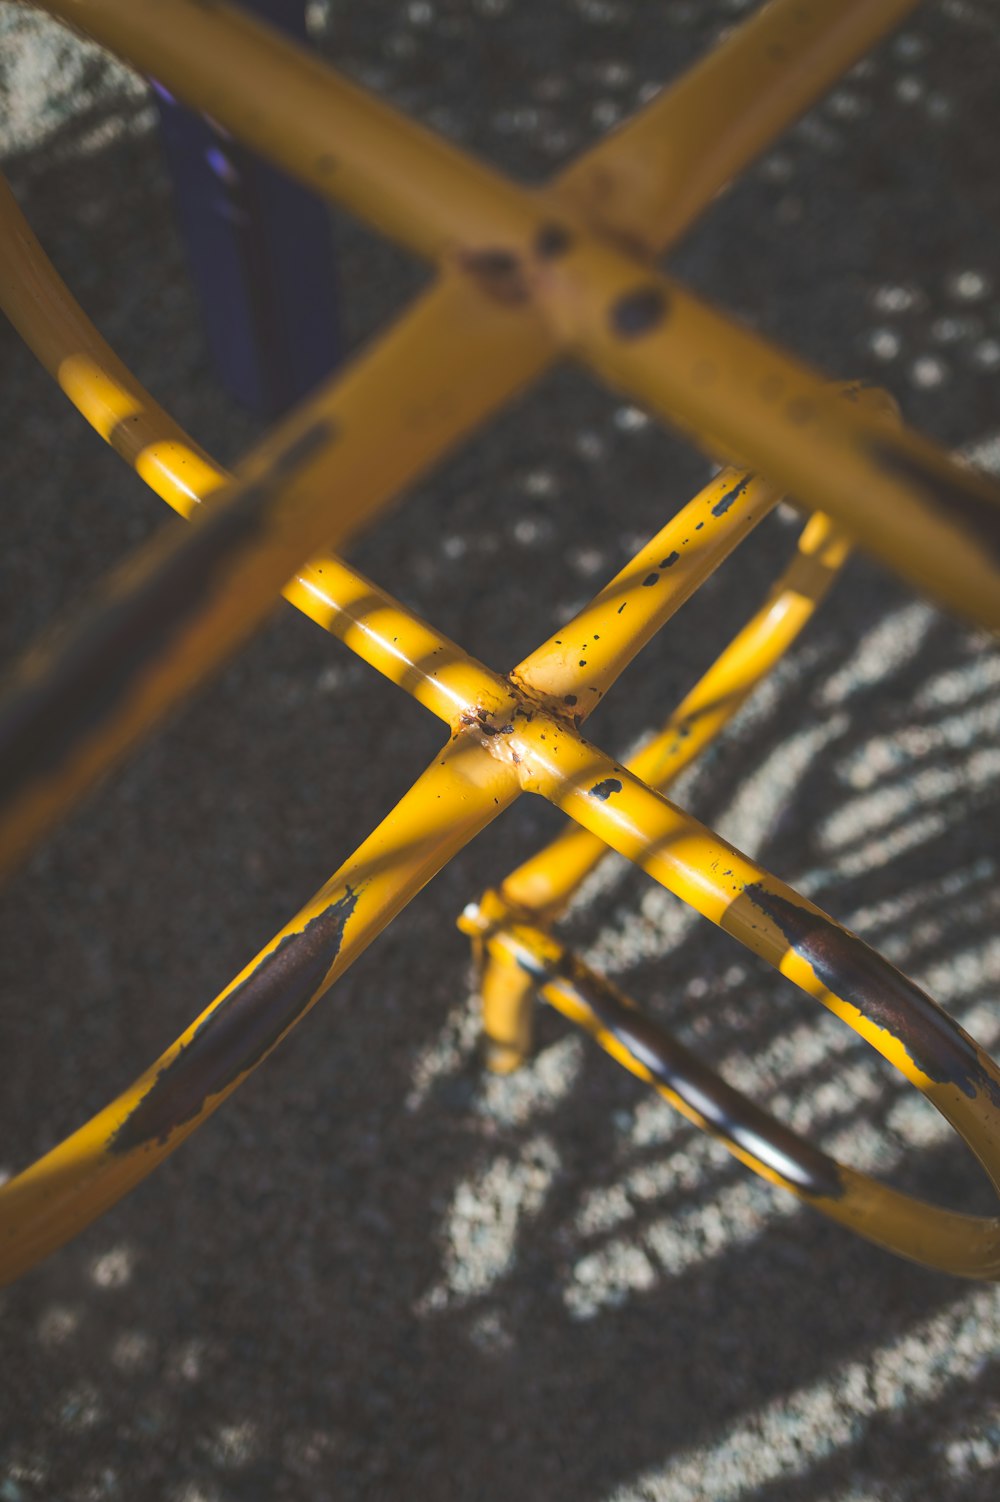 a close up of a yellow metal object